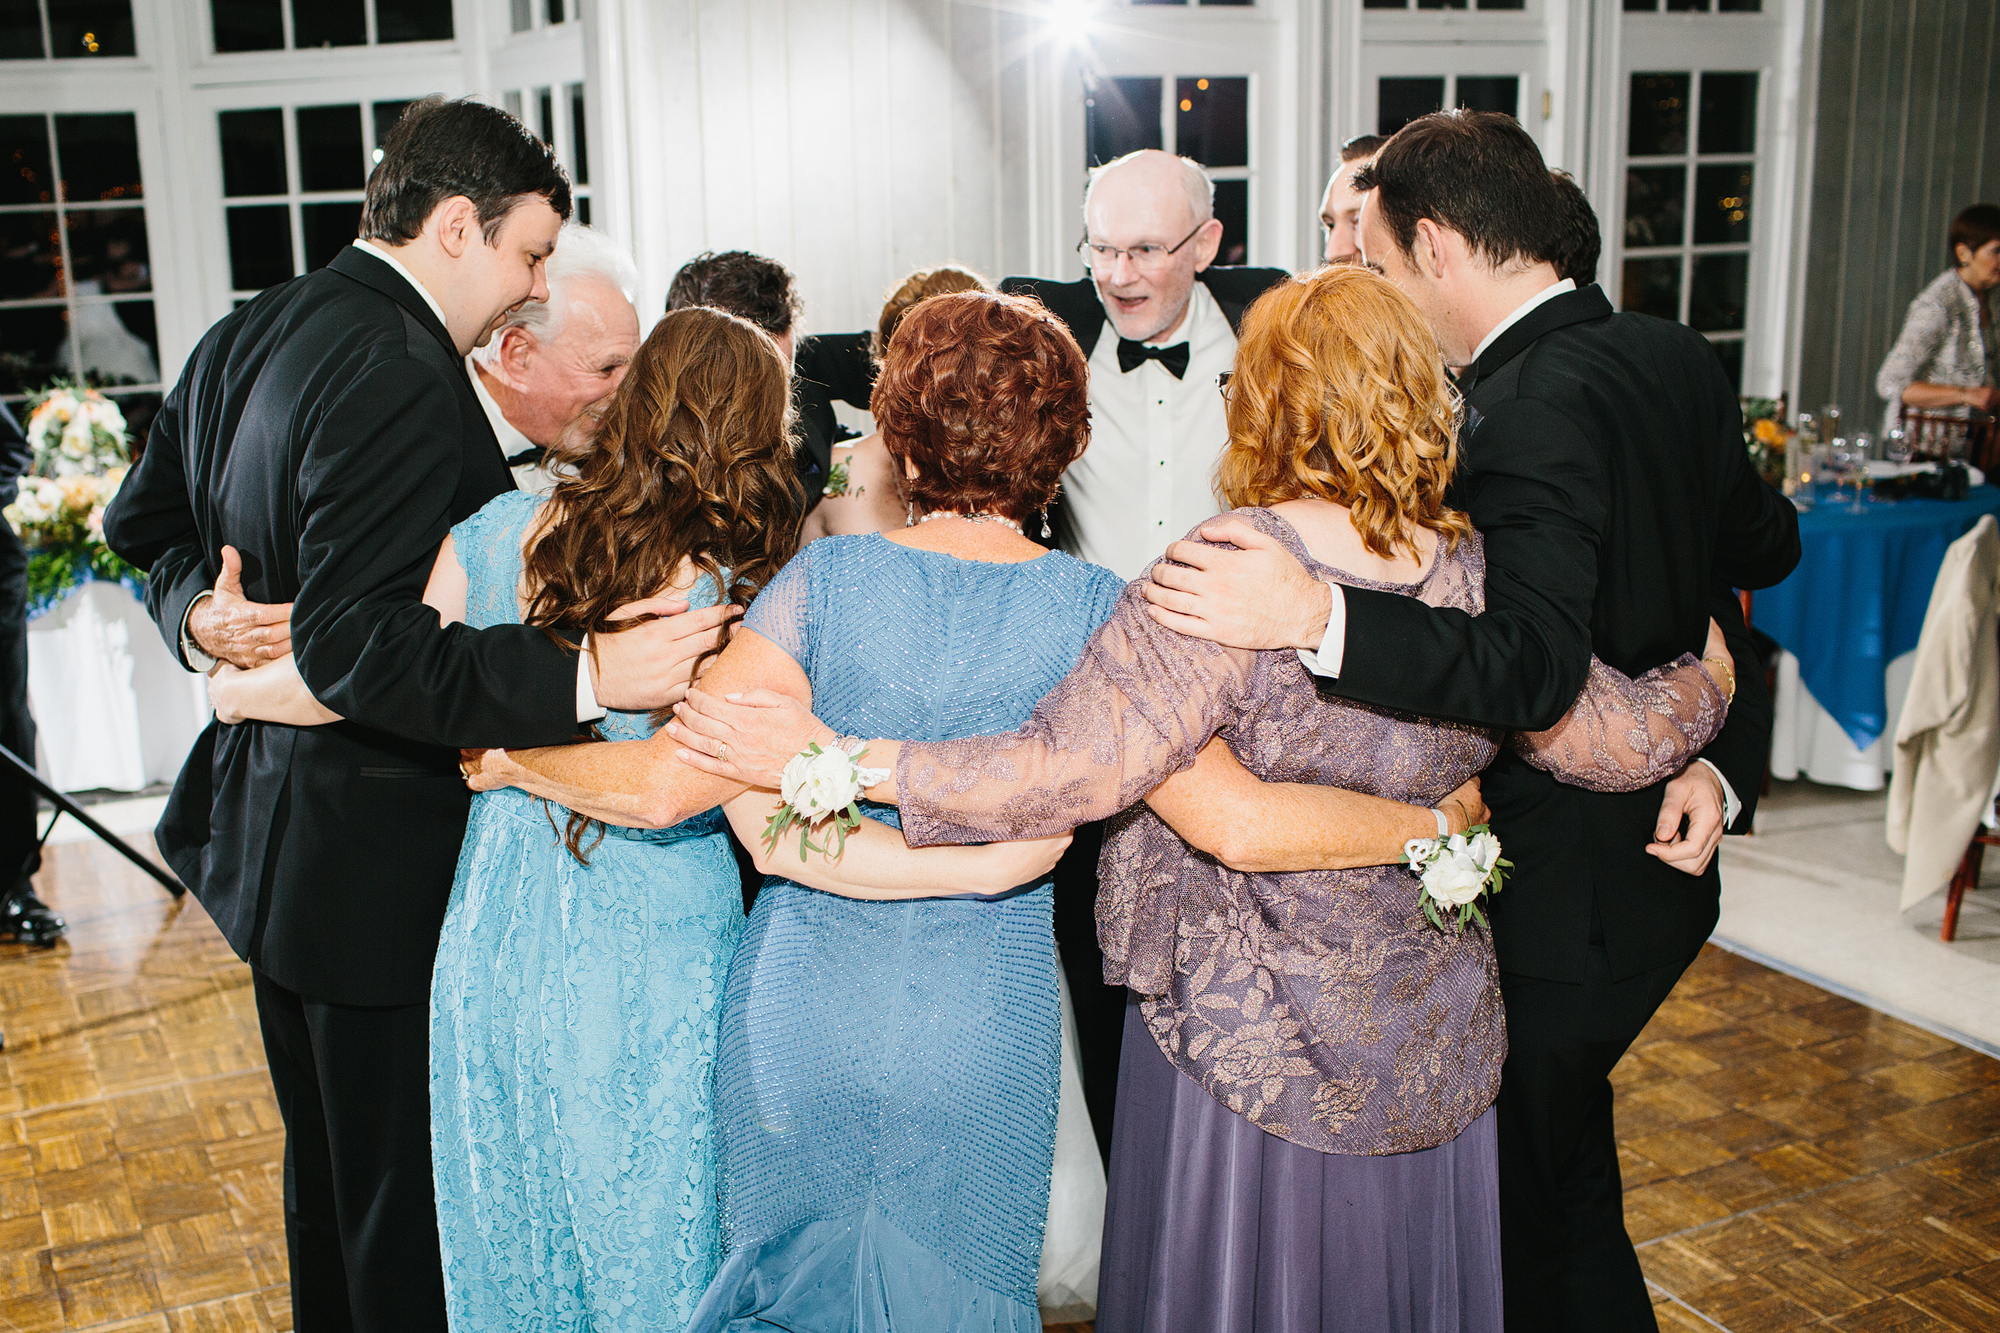 The bride and groom's immediate families dancing together. 